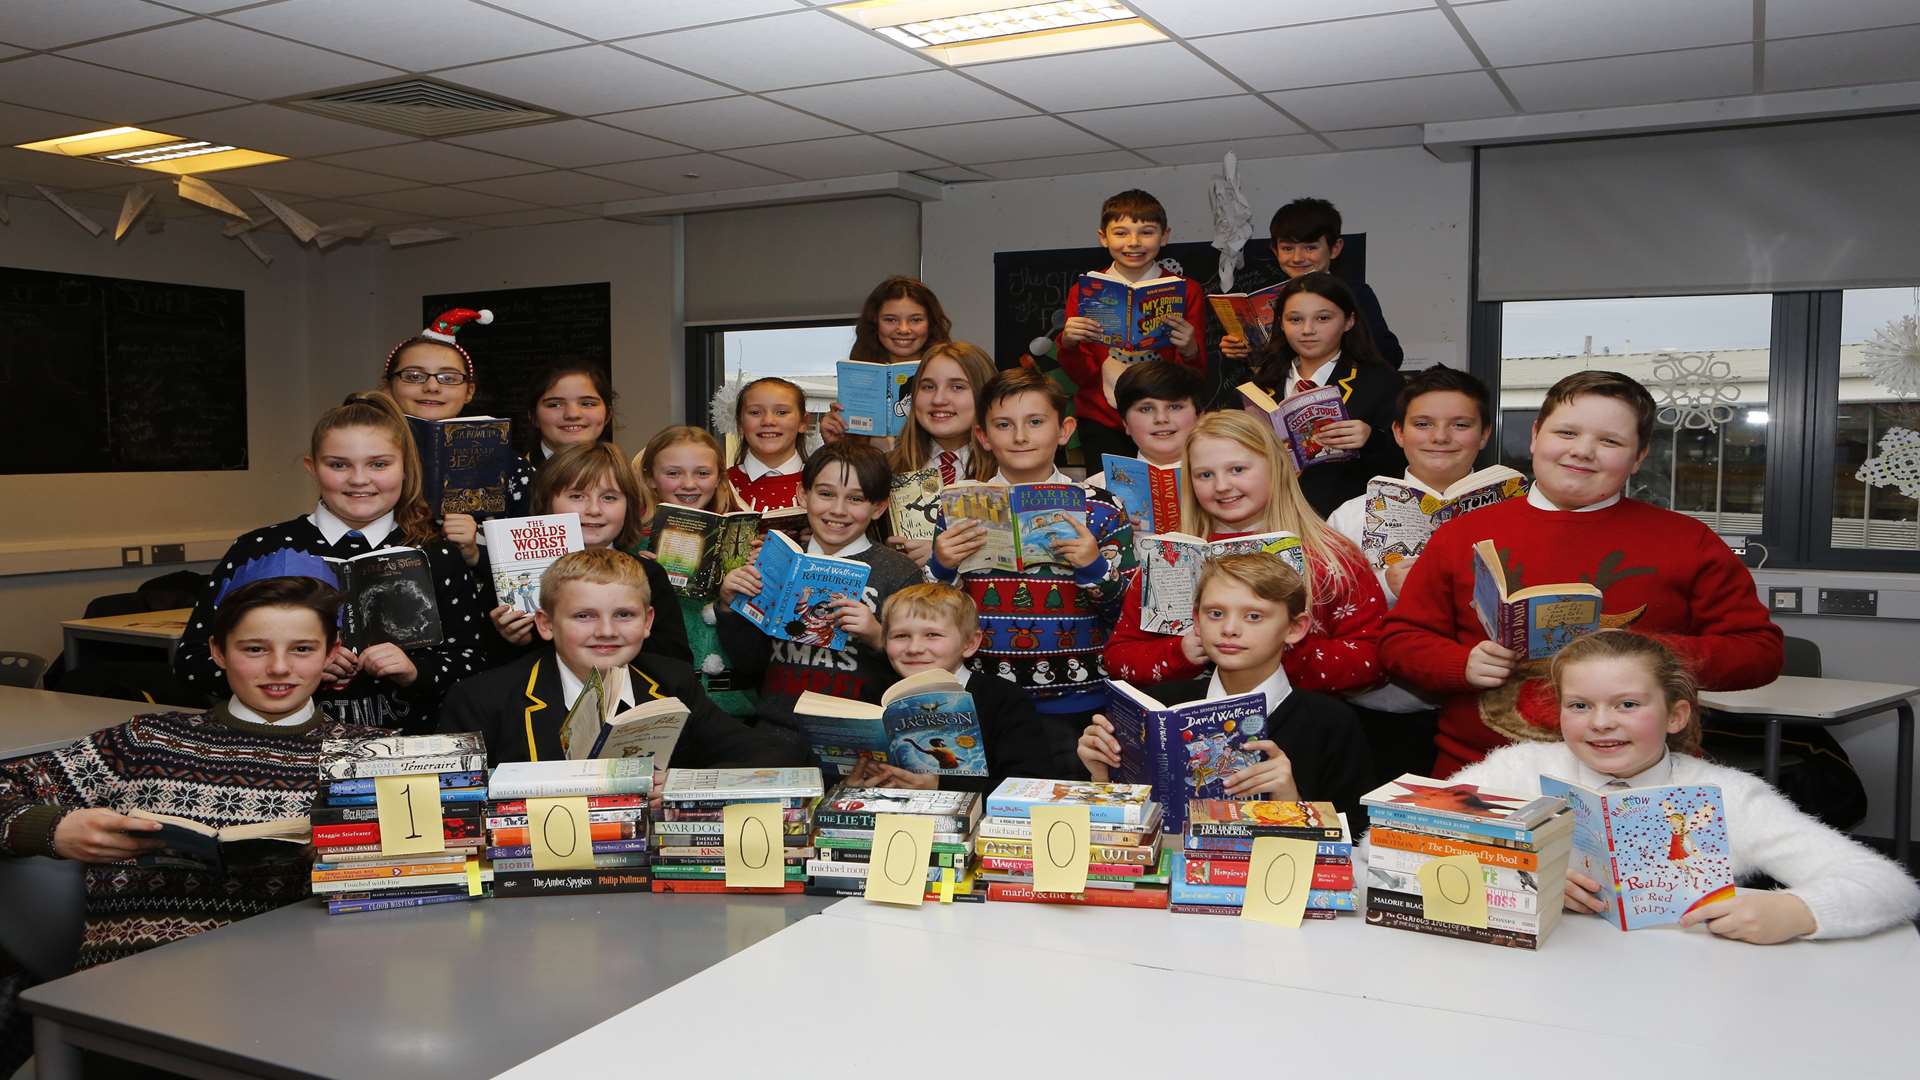 Year 7 pupils at Community College Whitstable have embraced the home reading scheme Buster's Book Club.